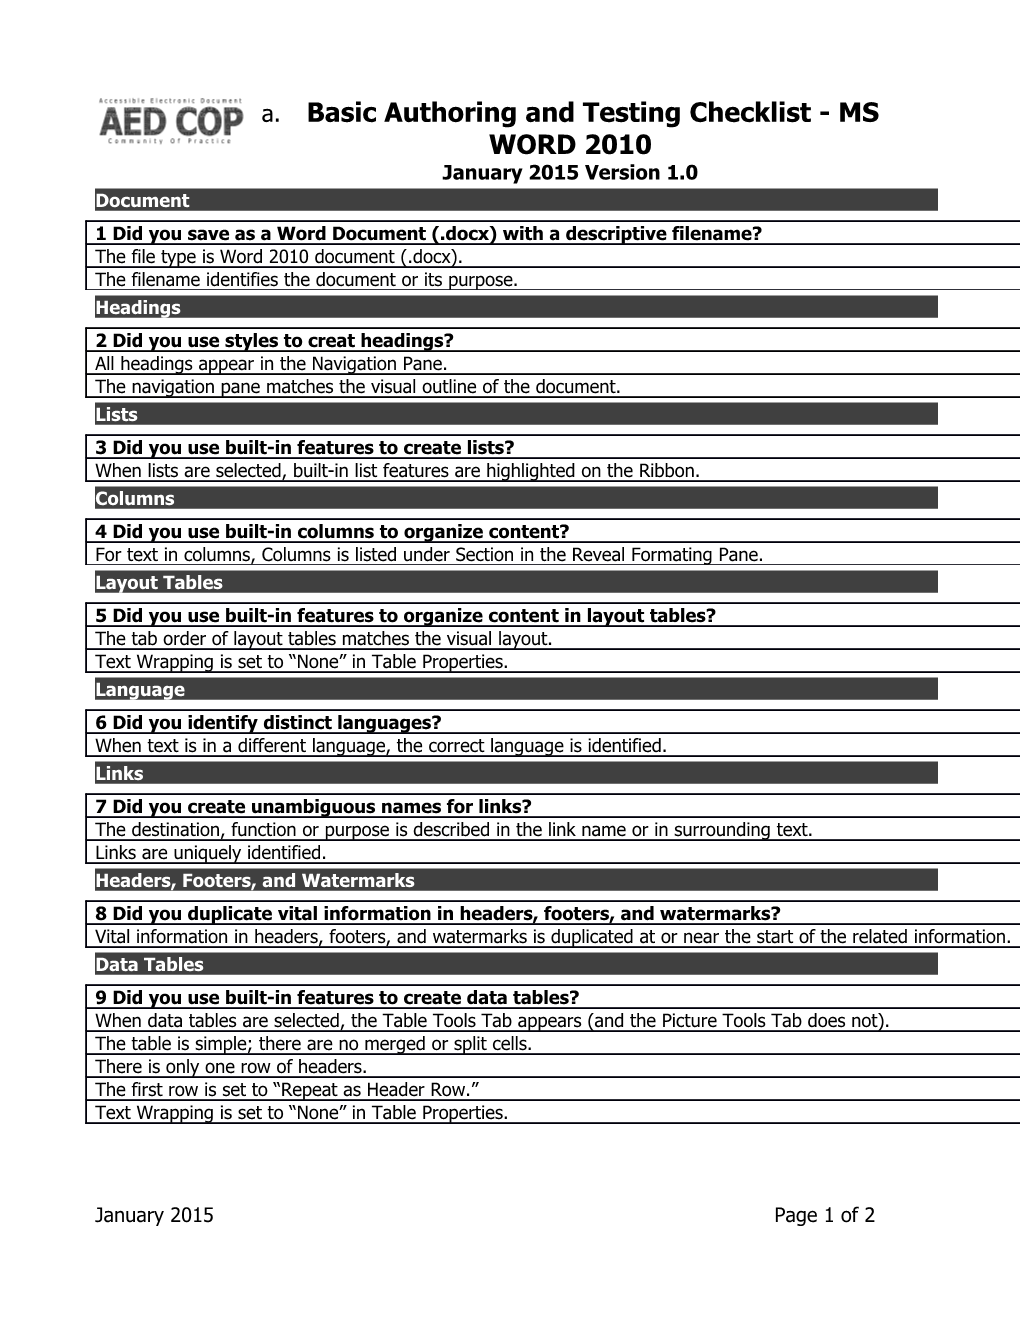 Basic Authoring and Testing Checklist - MS WORD 2010January 2015 Version 1.0